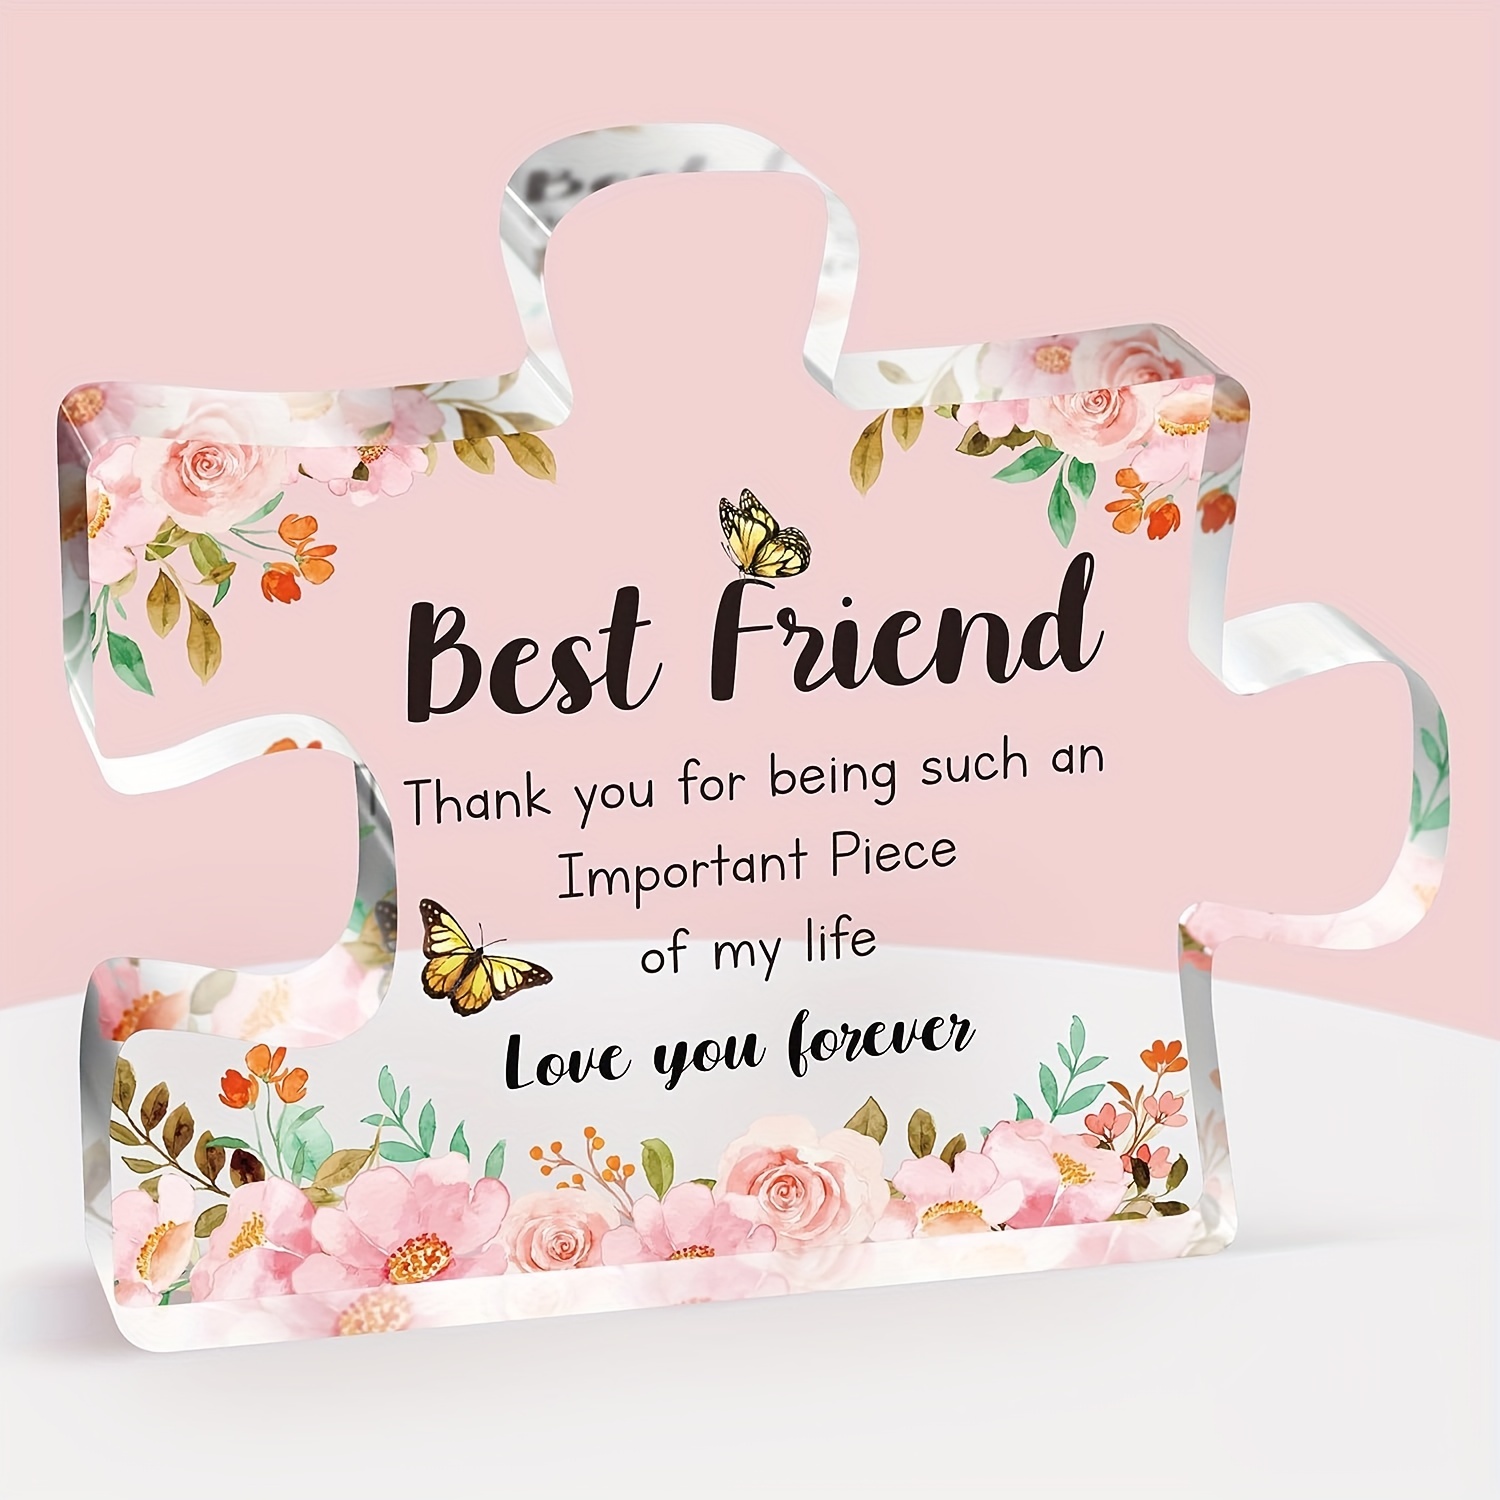 Gifts for Best Friend, Friendship Gifts for Women Friends - Best Friend  Birthday Gifts for Women - Friend Gifts for Women - Birthday Gifts for Women